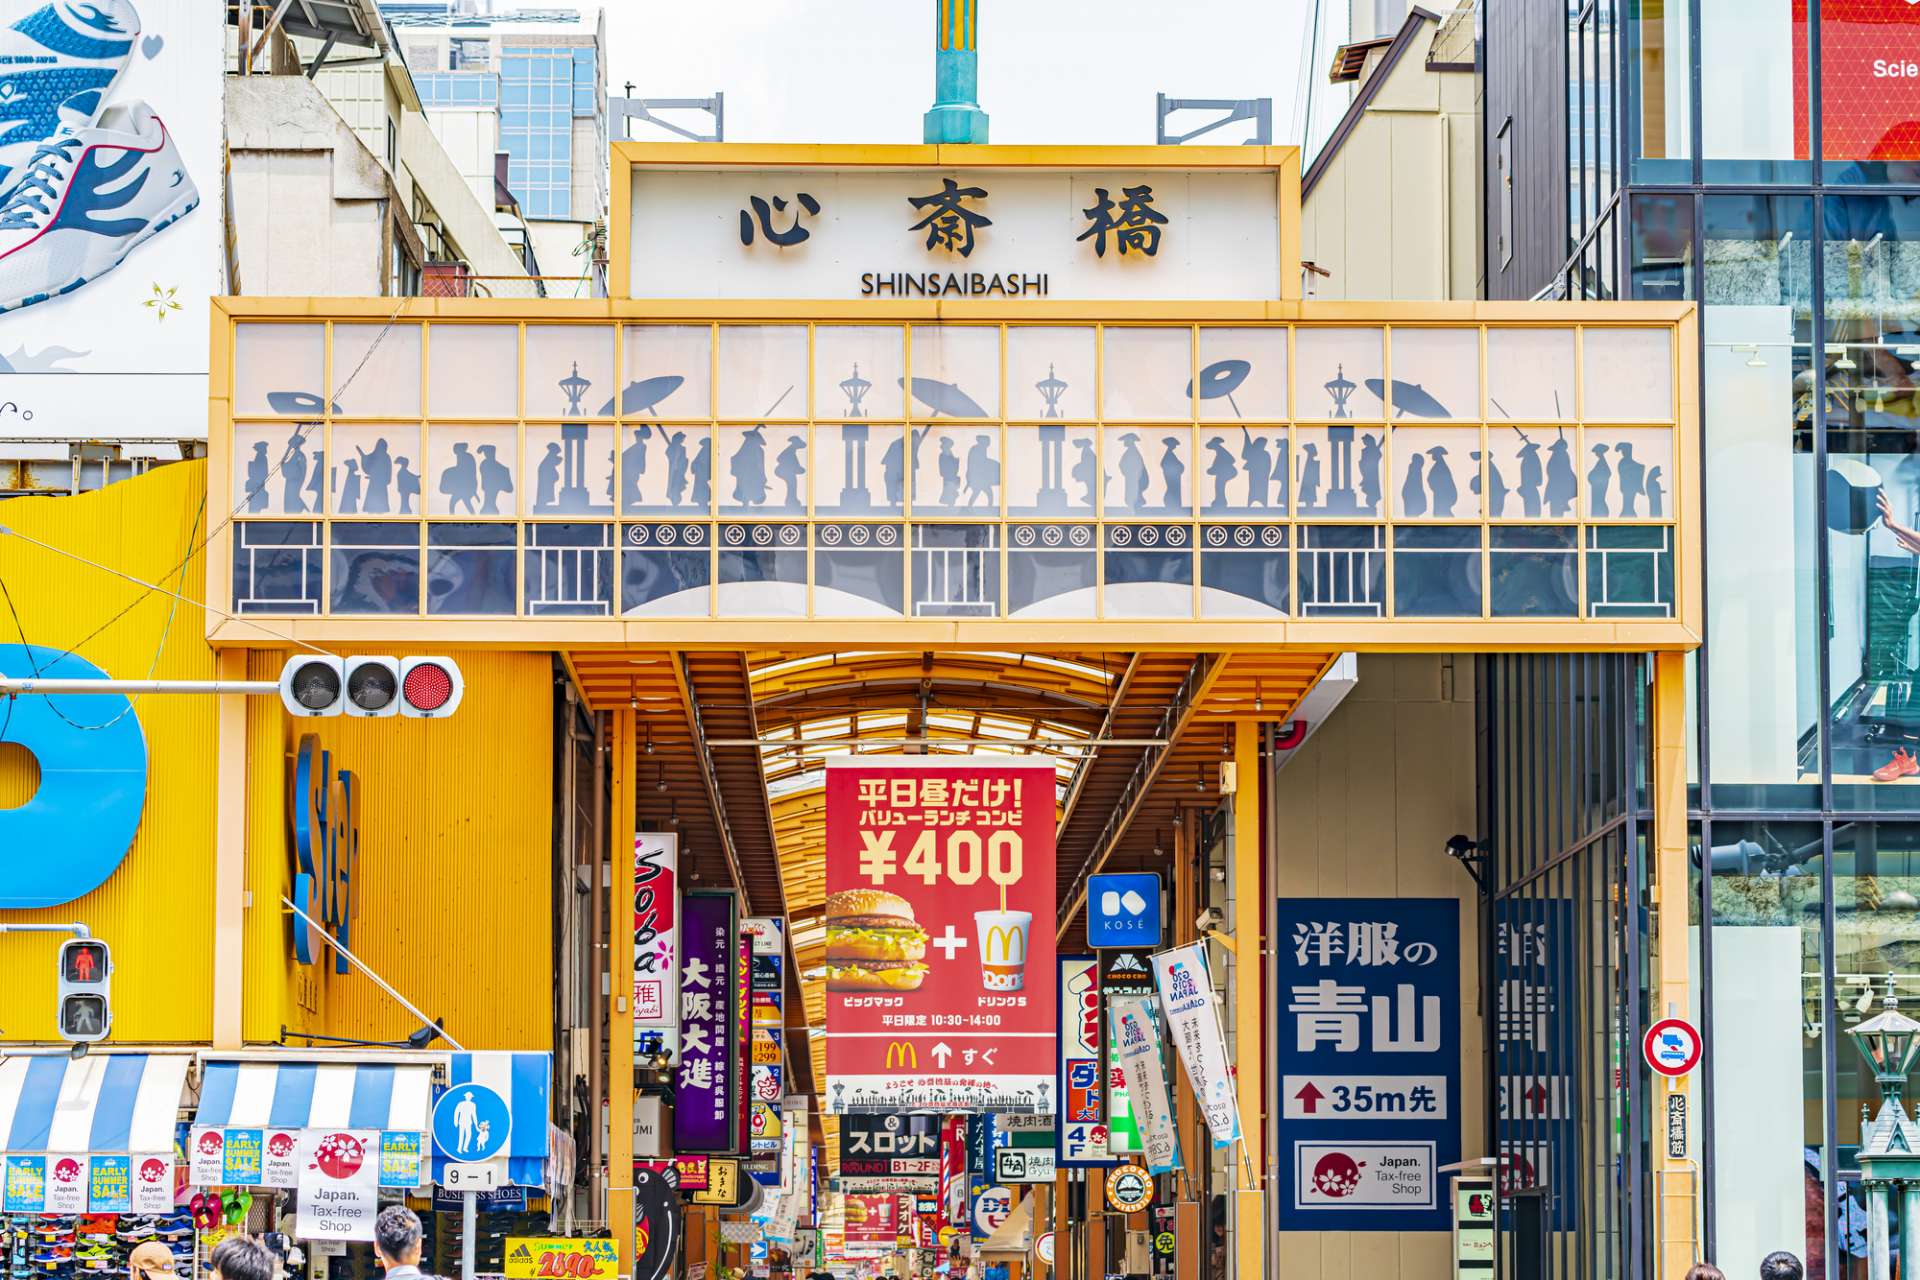 Shinsaibashi - Must-See, Access, Hours & Price | GOOD LUCK TRIP